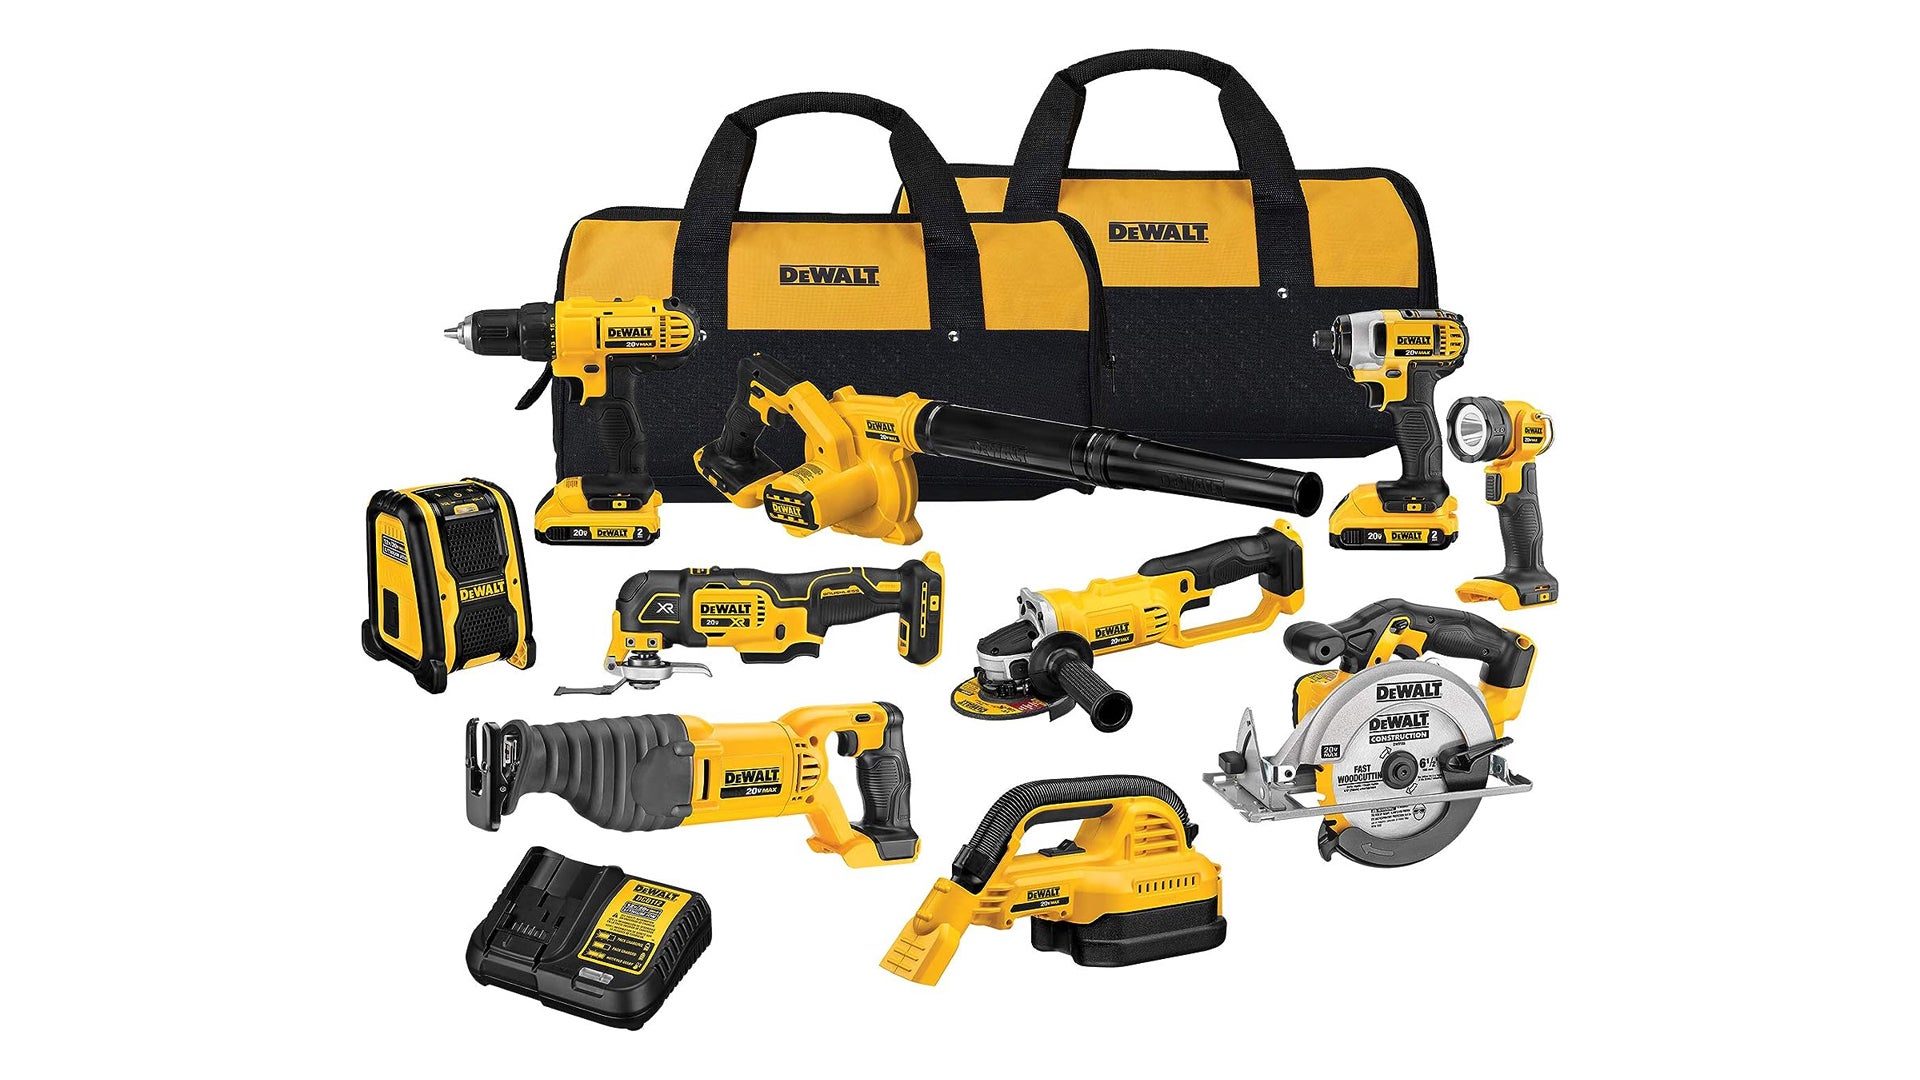 The DeWalt 10-Tool Combo Kit is a fantastic bargain with its current sale price.